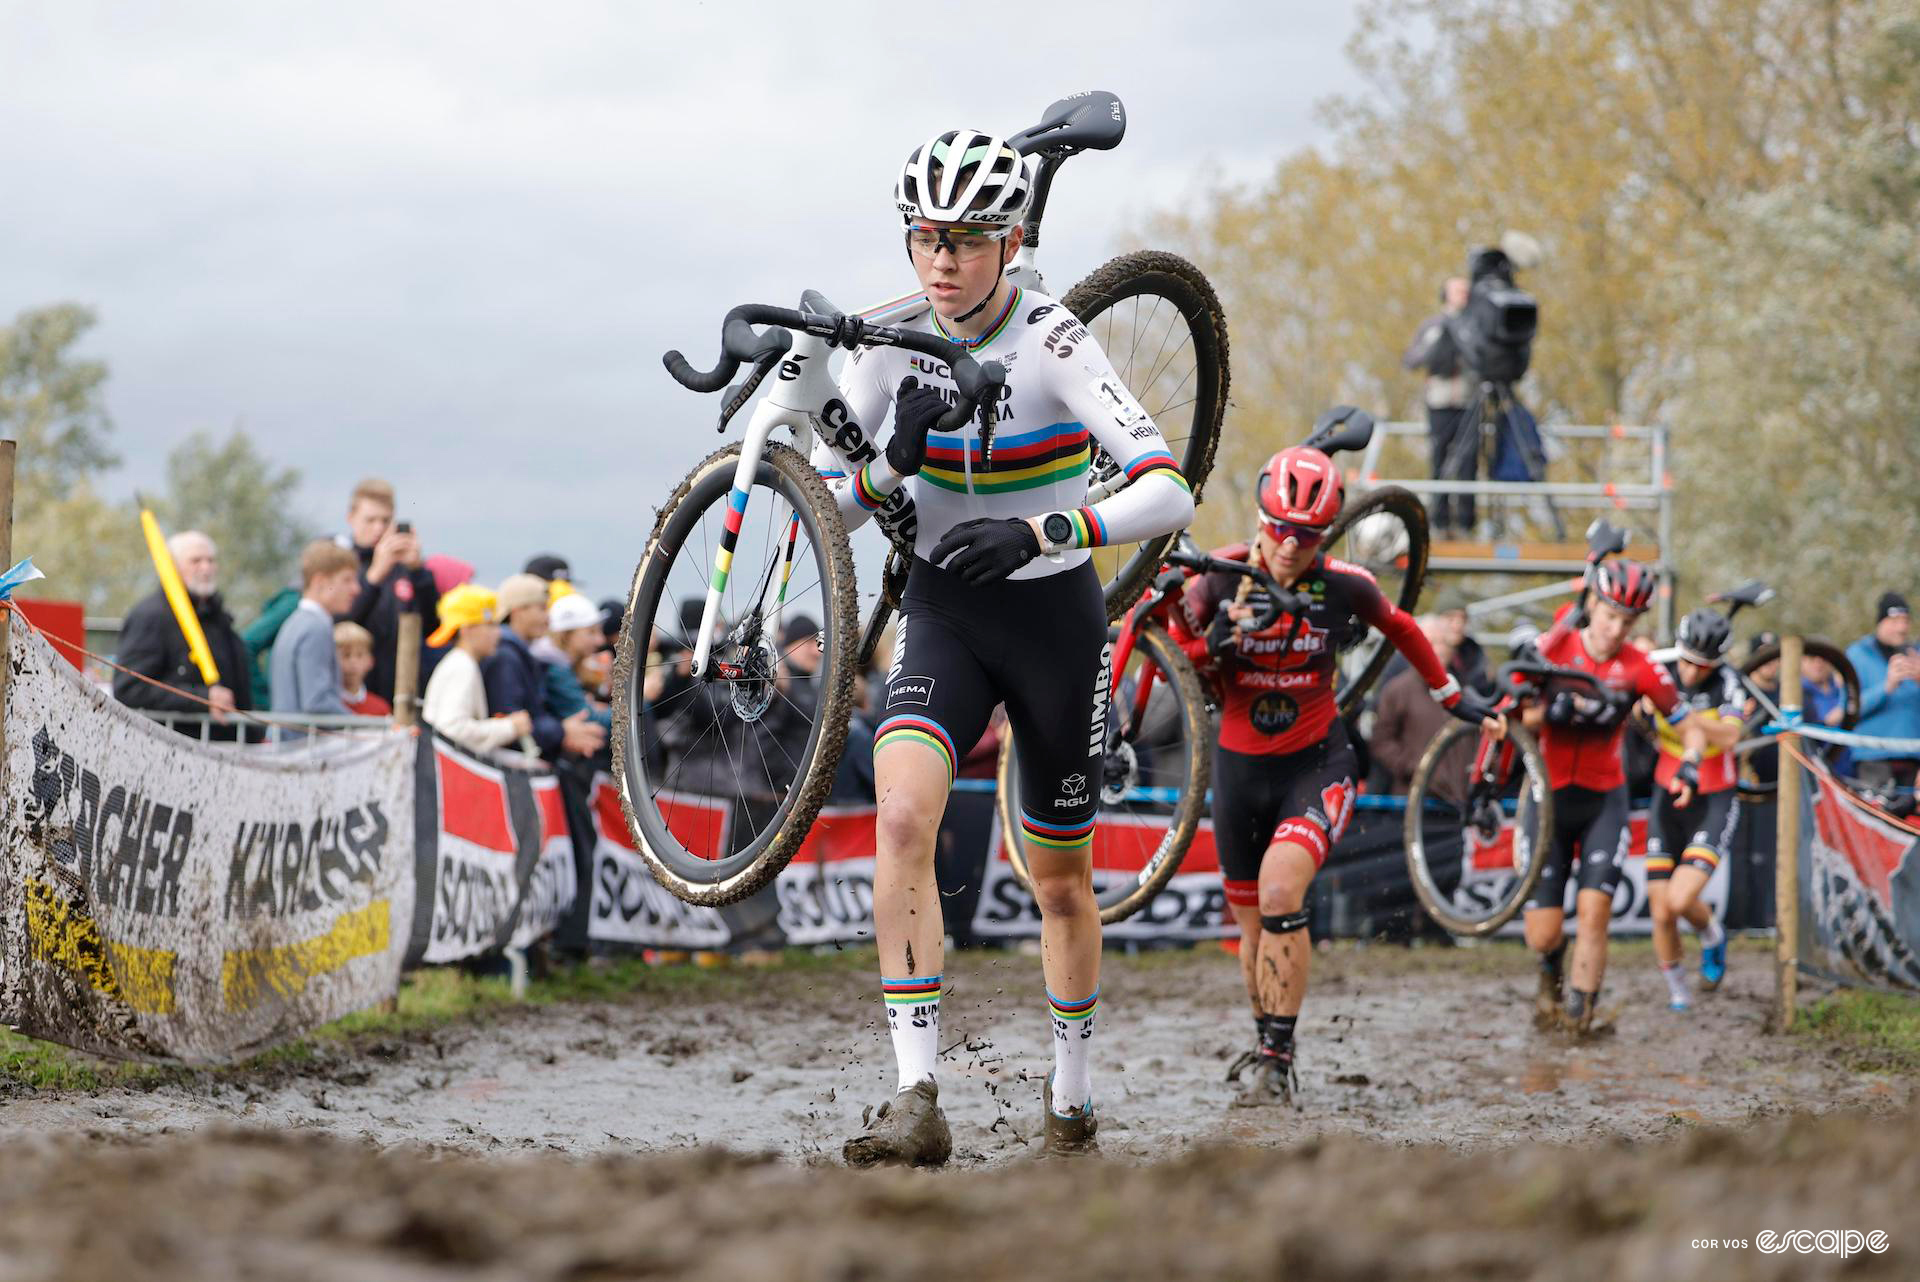 Fem van Empel leads the field through thick mud with her bike on her shoulder during Koppenbergcross.